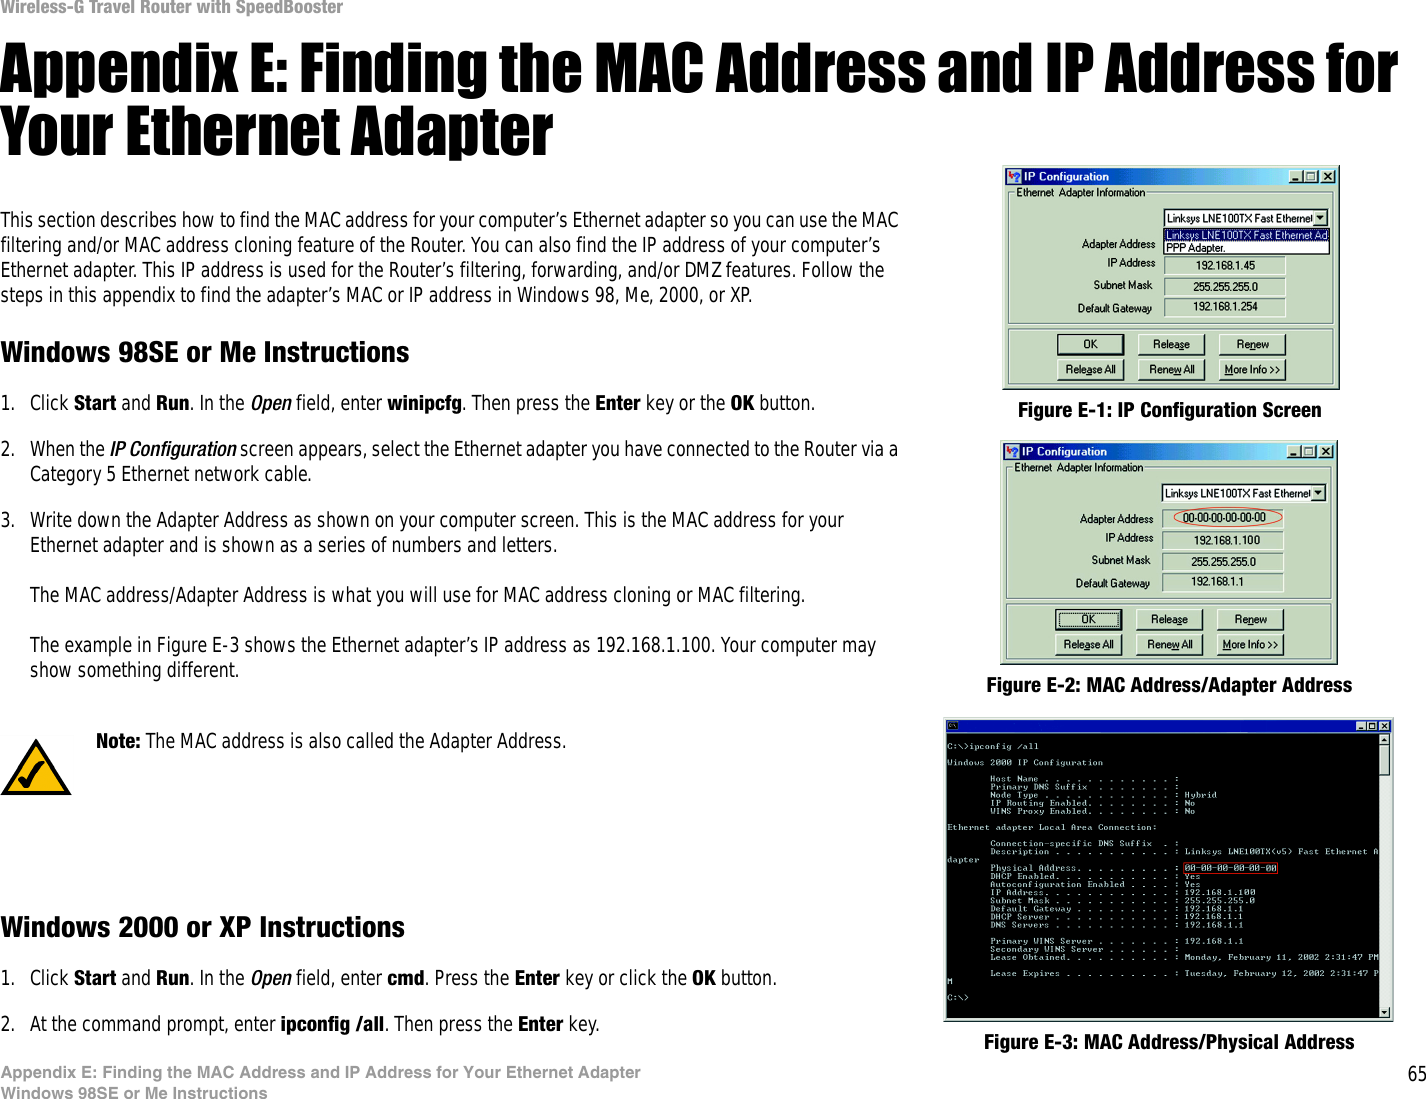 65Appendix E: Finding the MAC Address and IP Address for Your Ethernet AdapterWindows 98SE or Me InstructionsWireless-G Travel Router with SpeedBoosterAppendix E: Finding the MAC Address and IP Address for Your Ethernet AdapterThis section describes how to find the MAC address for your computer’s Ethernet adapter so you can use the MAC filtering and/or MAC address cloning feature of the Router. You can also find the IP address of your computer’s Ethernet adapter. This IP address is used for the Router’s filtering, forwarding, and/or DMZ features. Follow the steps in this appendix to find the adapter’s MAC or IP address in Windows 98, Me, 2000, or XP.Windows 98SE or Me Instructions1. Click Start and Run. In the Open field, enter winipcfg. Then press the Enter key or the OK button. 2. When the IP Configuration screen appears, select the Ethernet adapter you have connected to the Router via a Category 5 Ethernet network cable.3. Write down the Adapter Address as shown on your computer screen. This is the MAC address for your Ethernet adapter and is shown as a series of numbers and letters.The MAC address/Adapter Address is what you will use for MAC address cloning or MAC filtering.The example in Figure E-3 shows the Ethernet adapter’s IP address as 192.168.1.100. Your computer may show something different.Windows 2000 or XP Instructions1. Click Start and Run. In the Open field, enter cmd. Press the Enter key or click the OK button.2. At the command prompt, enter ipconfig /all. Then press the Enter key.Figure E-2: MAC Address/Adapter AddressFigure E-1: IP Configuration ScreenNote: The MAC address is also called the Adapter Address.Figure E-3: MAC Address/Physical Address